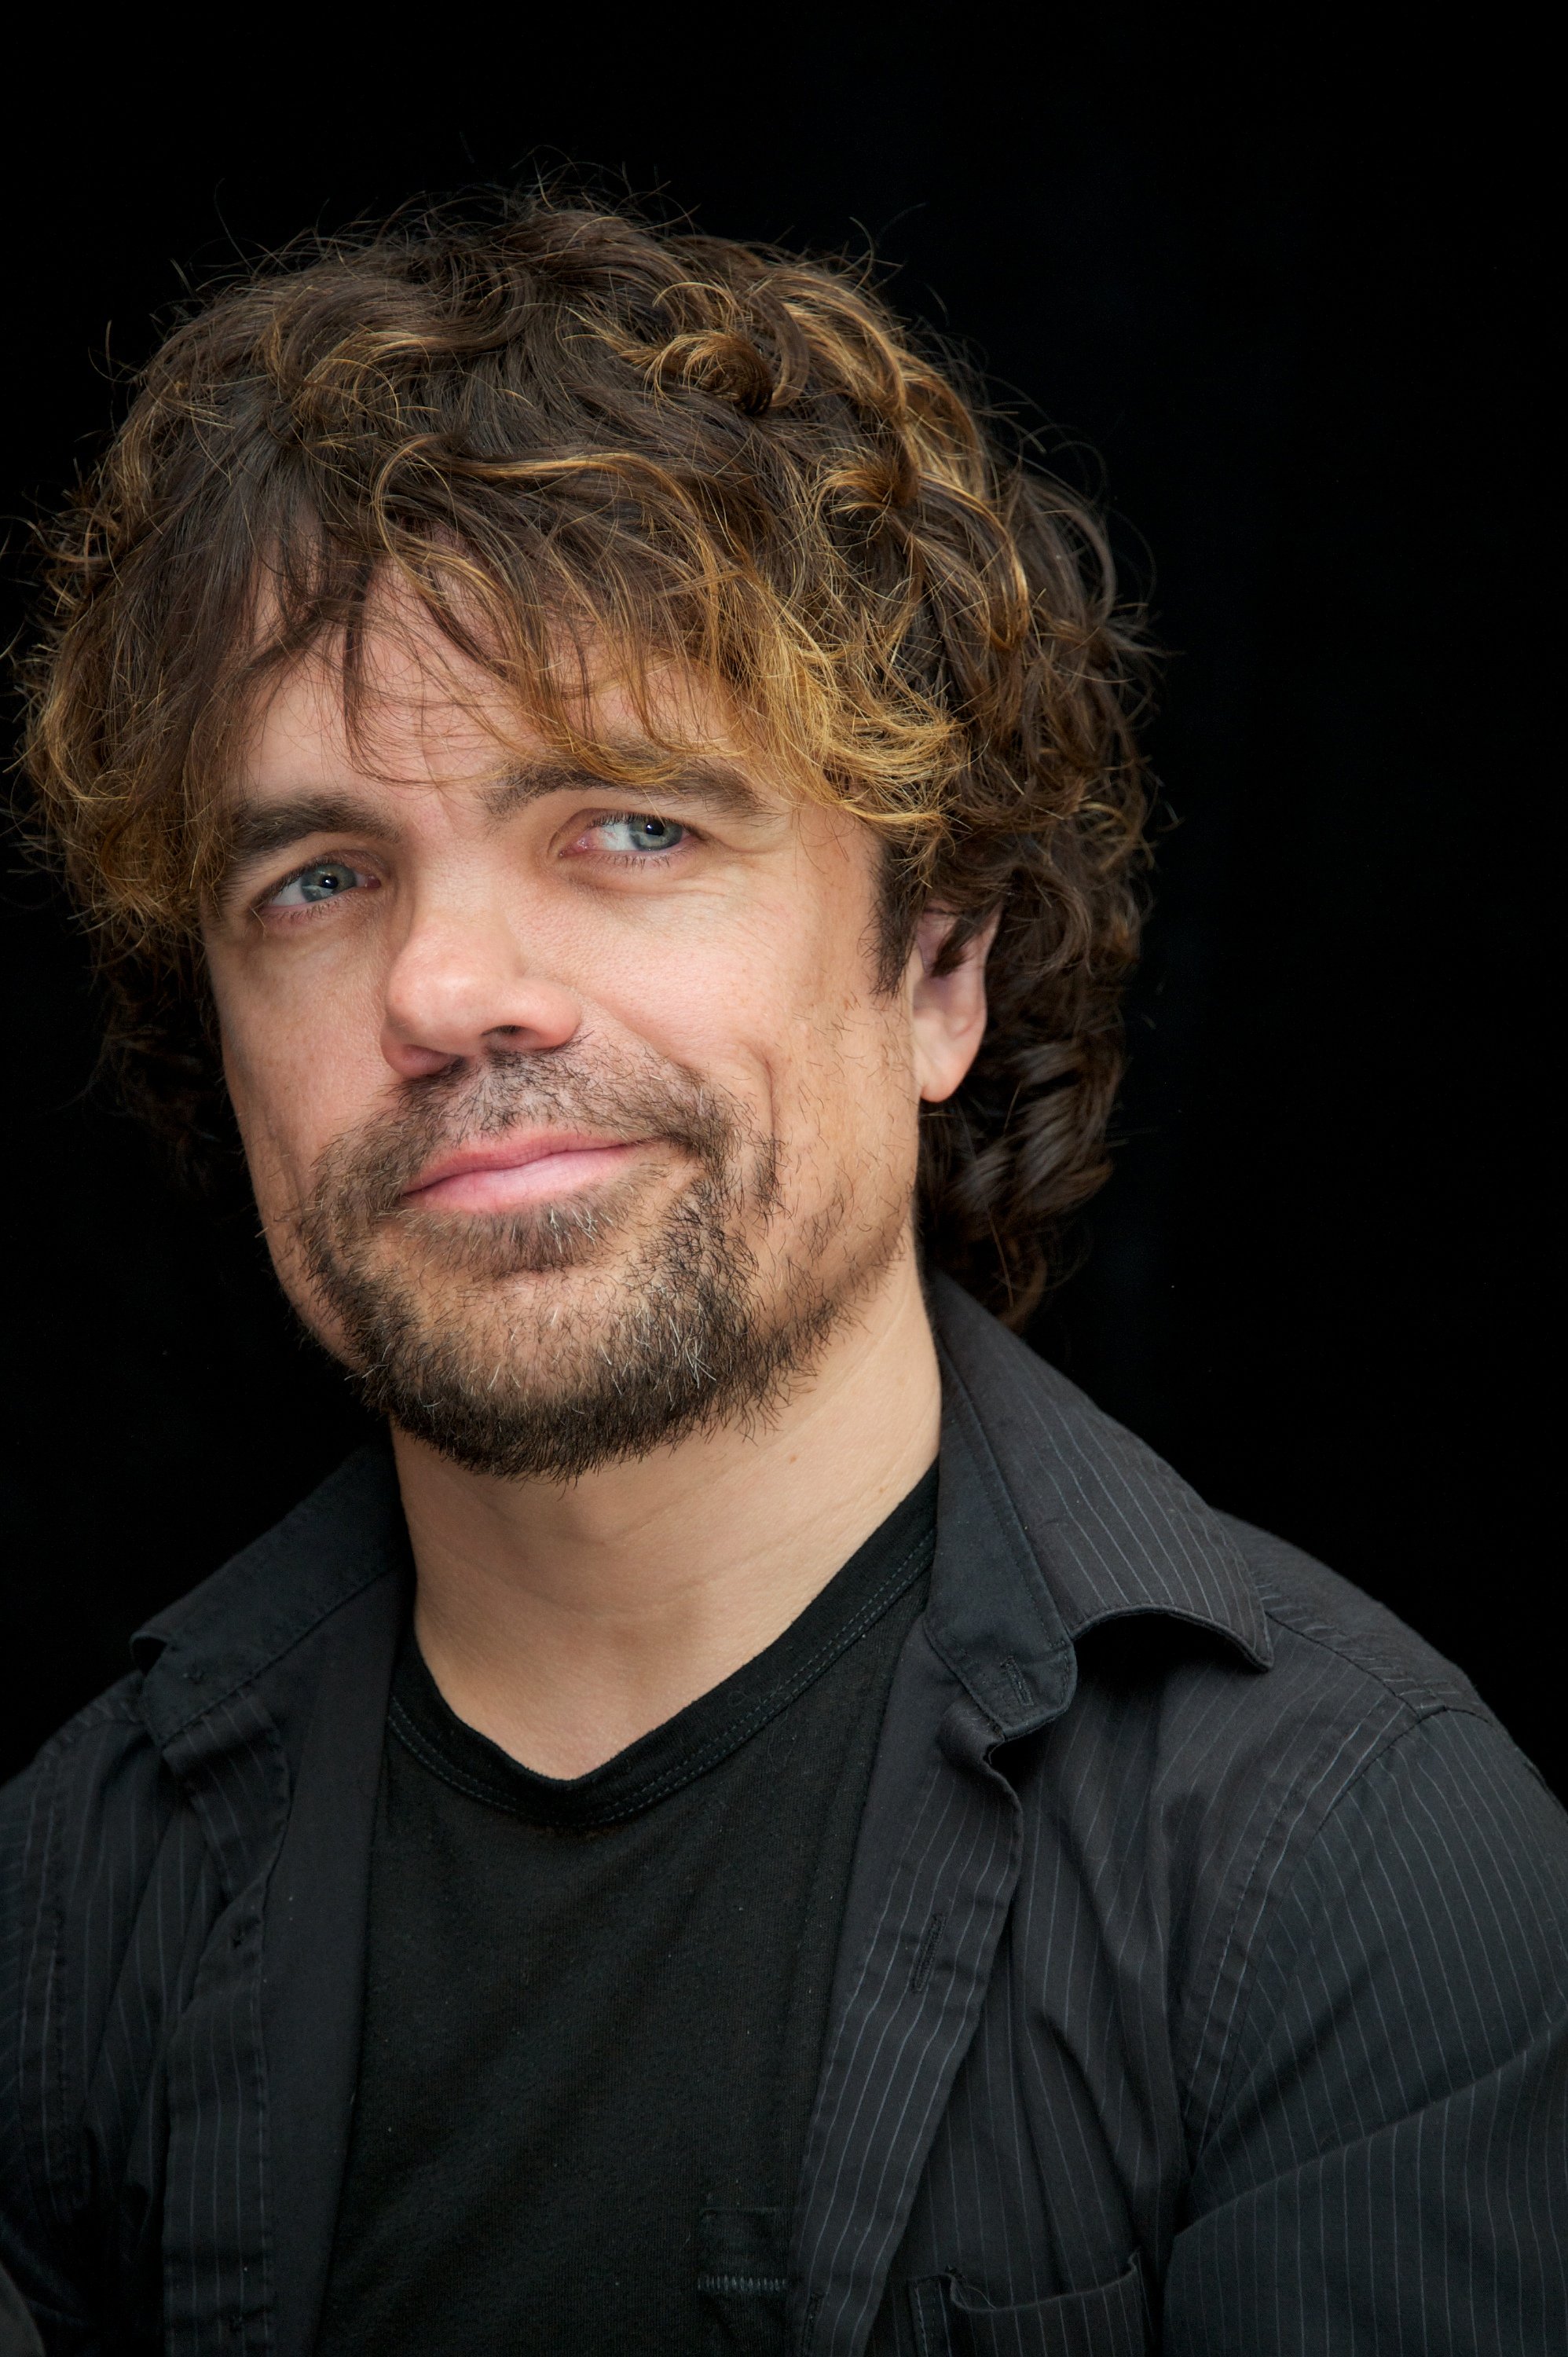 Peter Dinklage am 9. Mai 2014 in New York City | Quelle: Getty Images